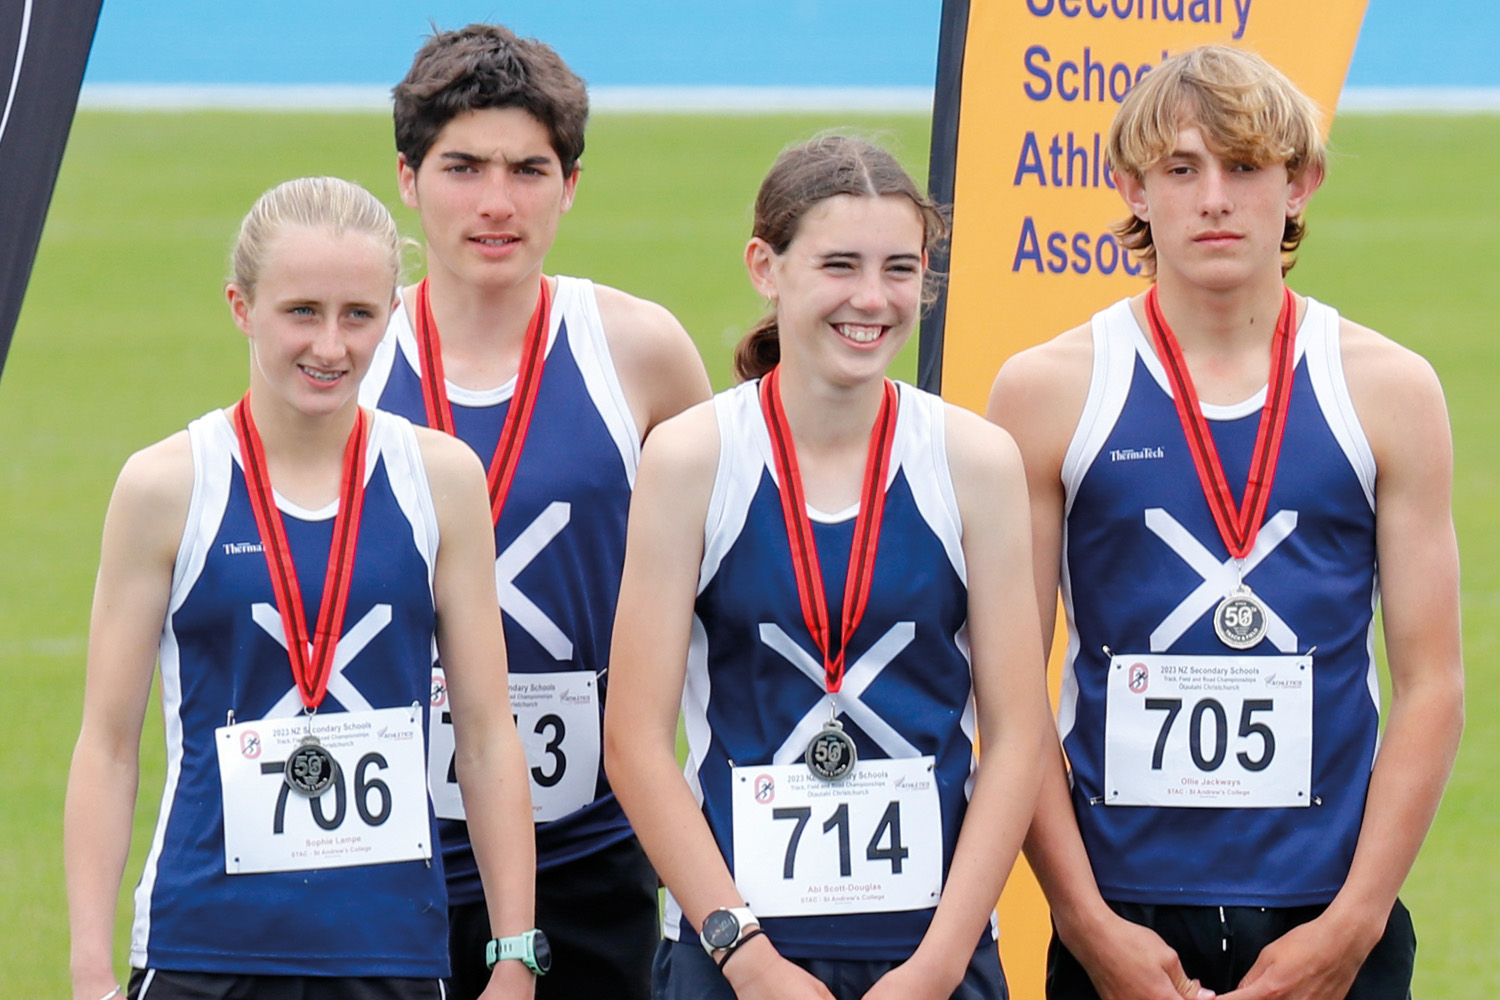 St Andrew's College students Sophie Lampe, Kupa Rule, Abigail Scott-Douglas and Oliver Jackways at the National Track and Field Championships.